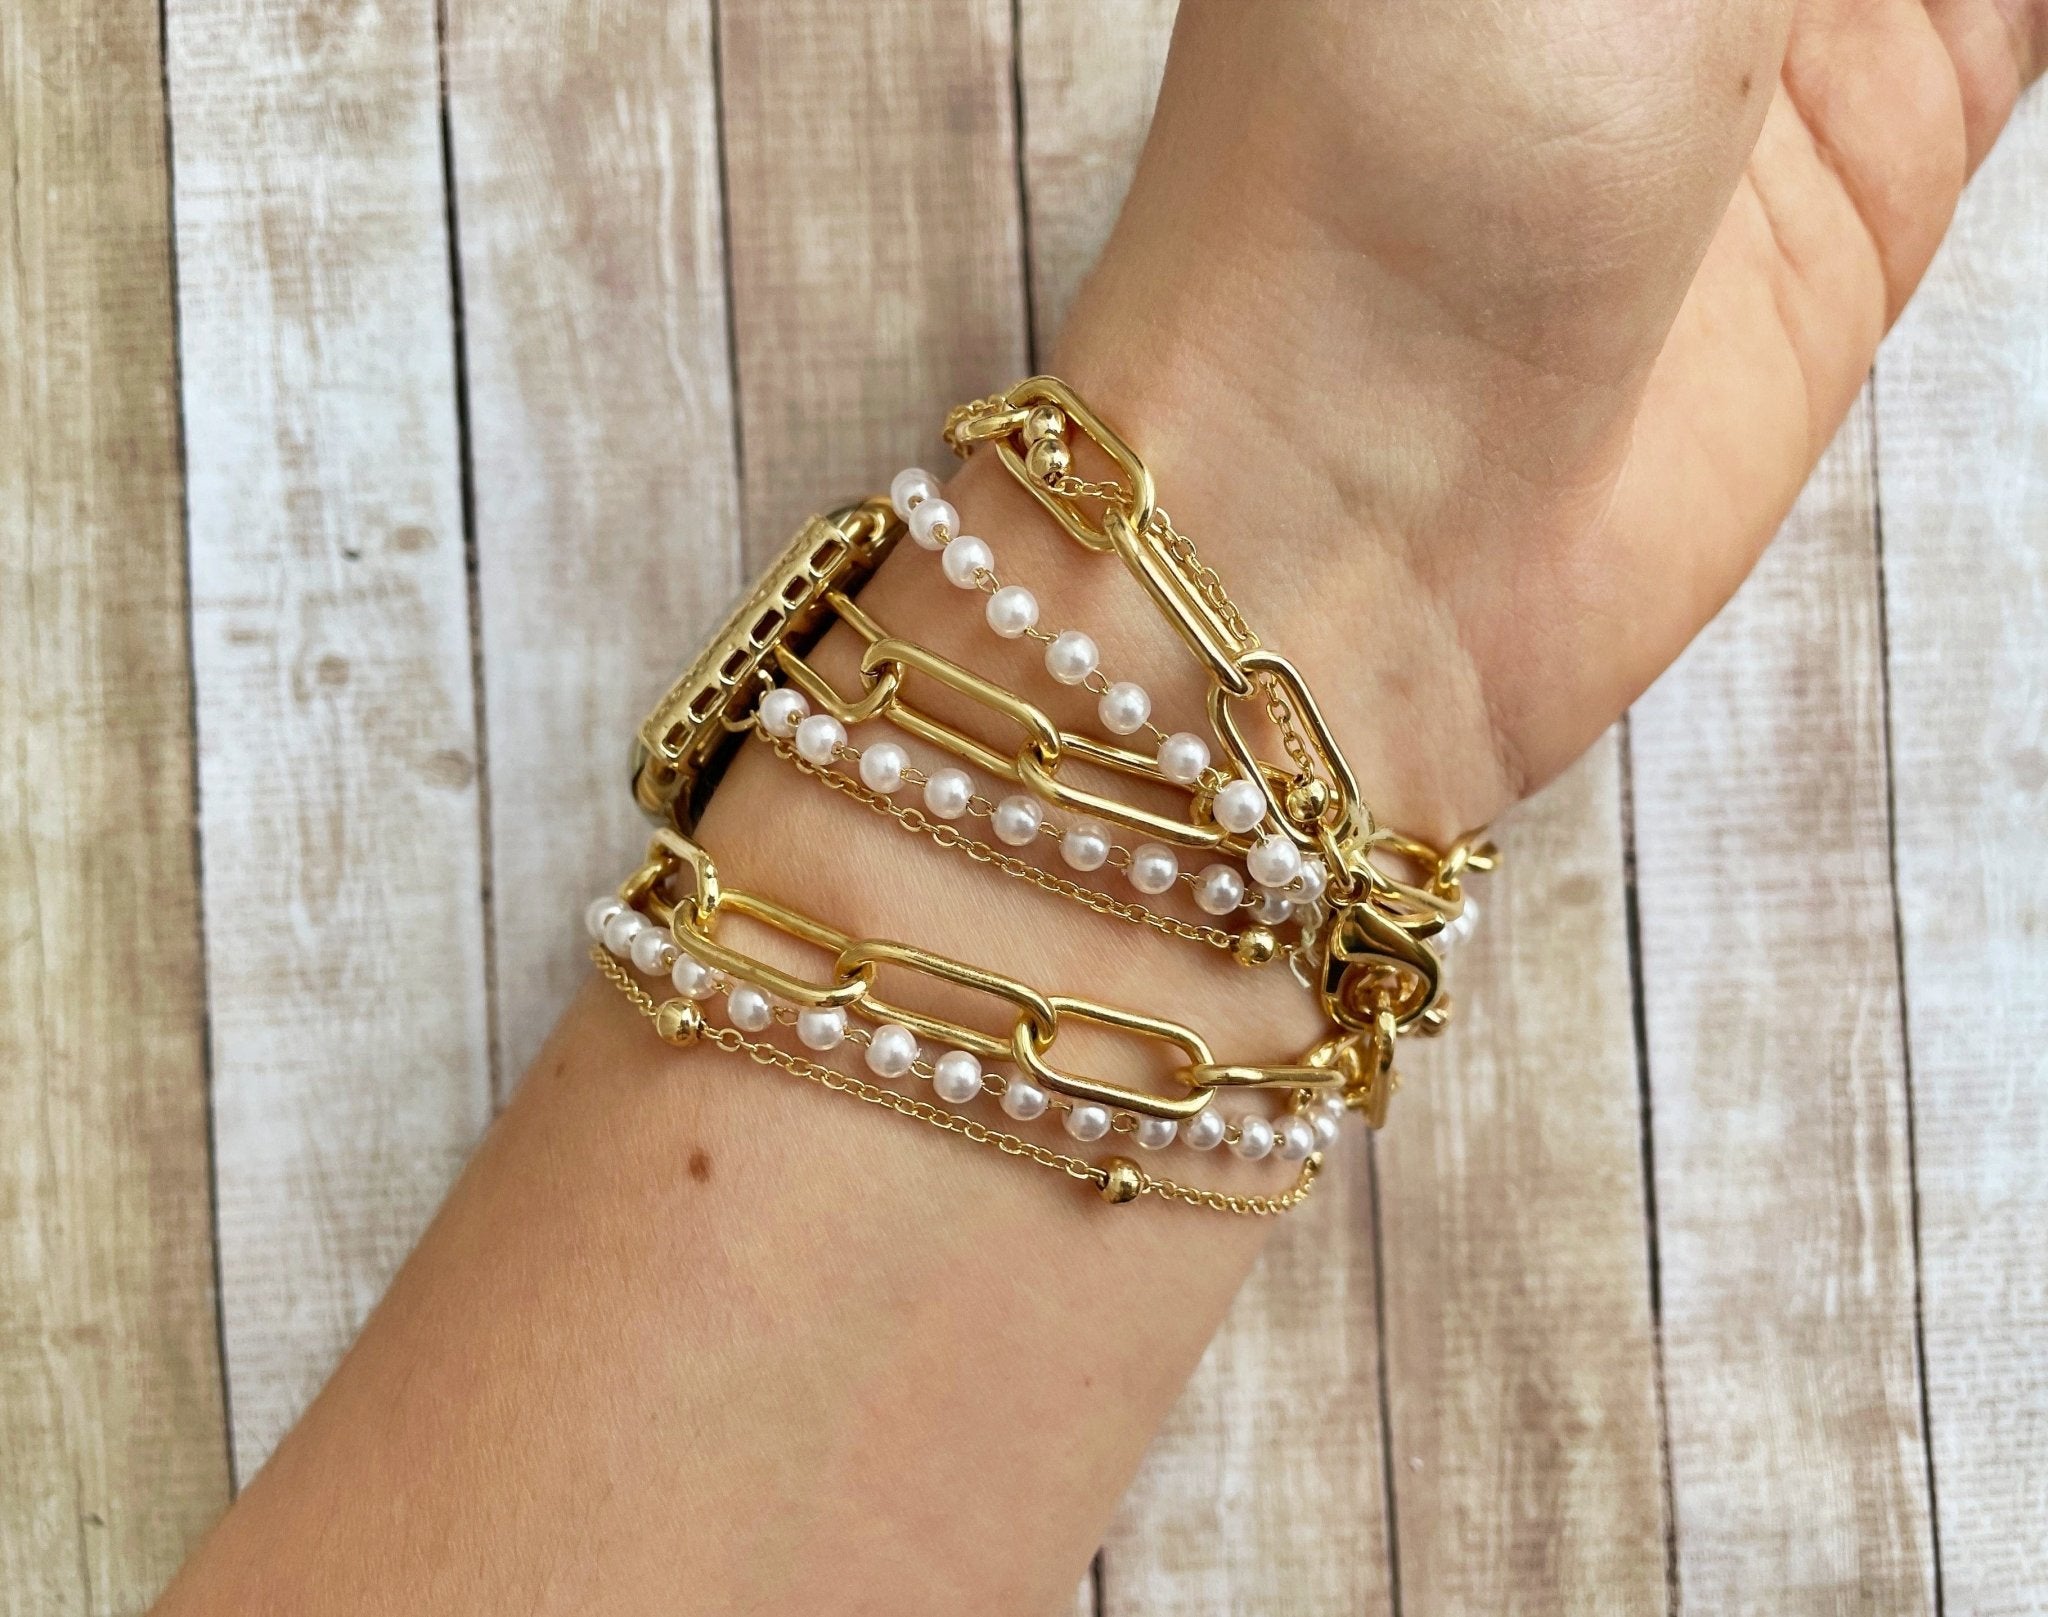 Pearls and Chains Gold Bracelet Band for Apple Watch Gold Link Chain Bracelet for iWatch 38 40 42 44mm - Mareevo